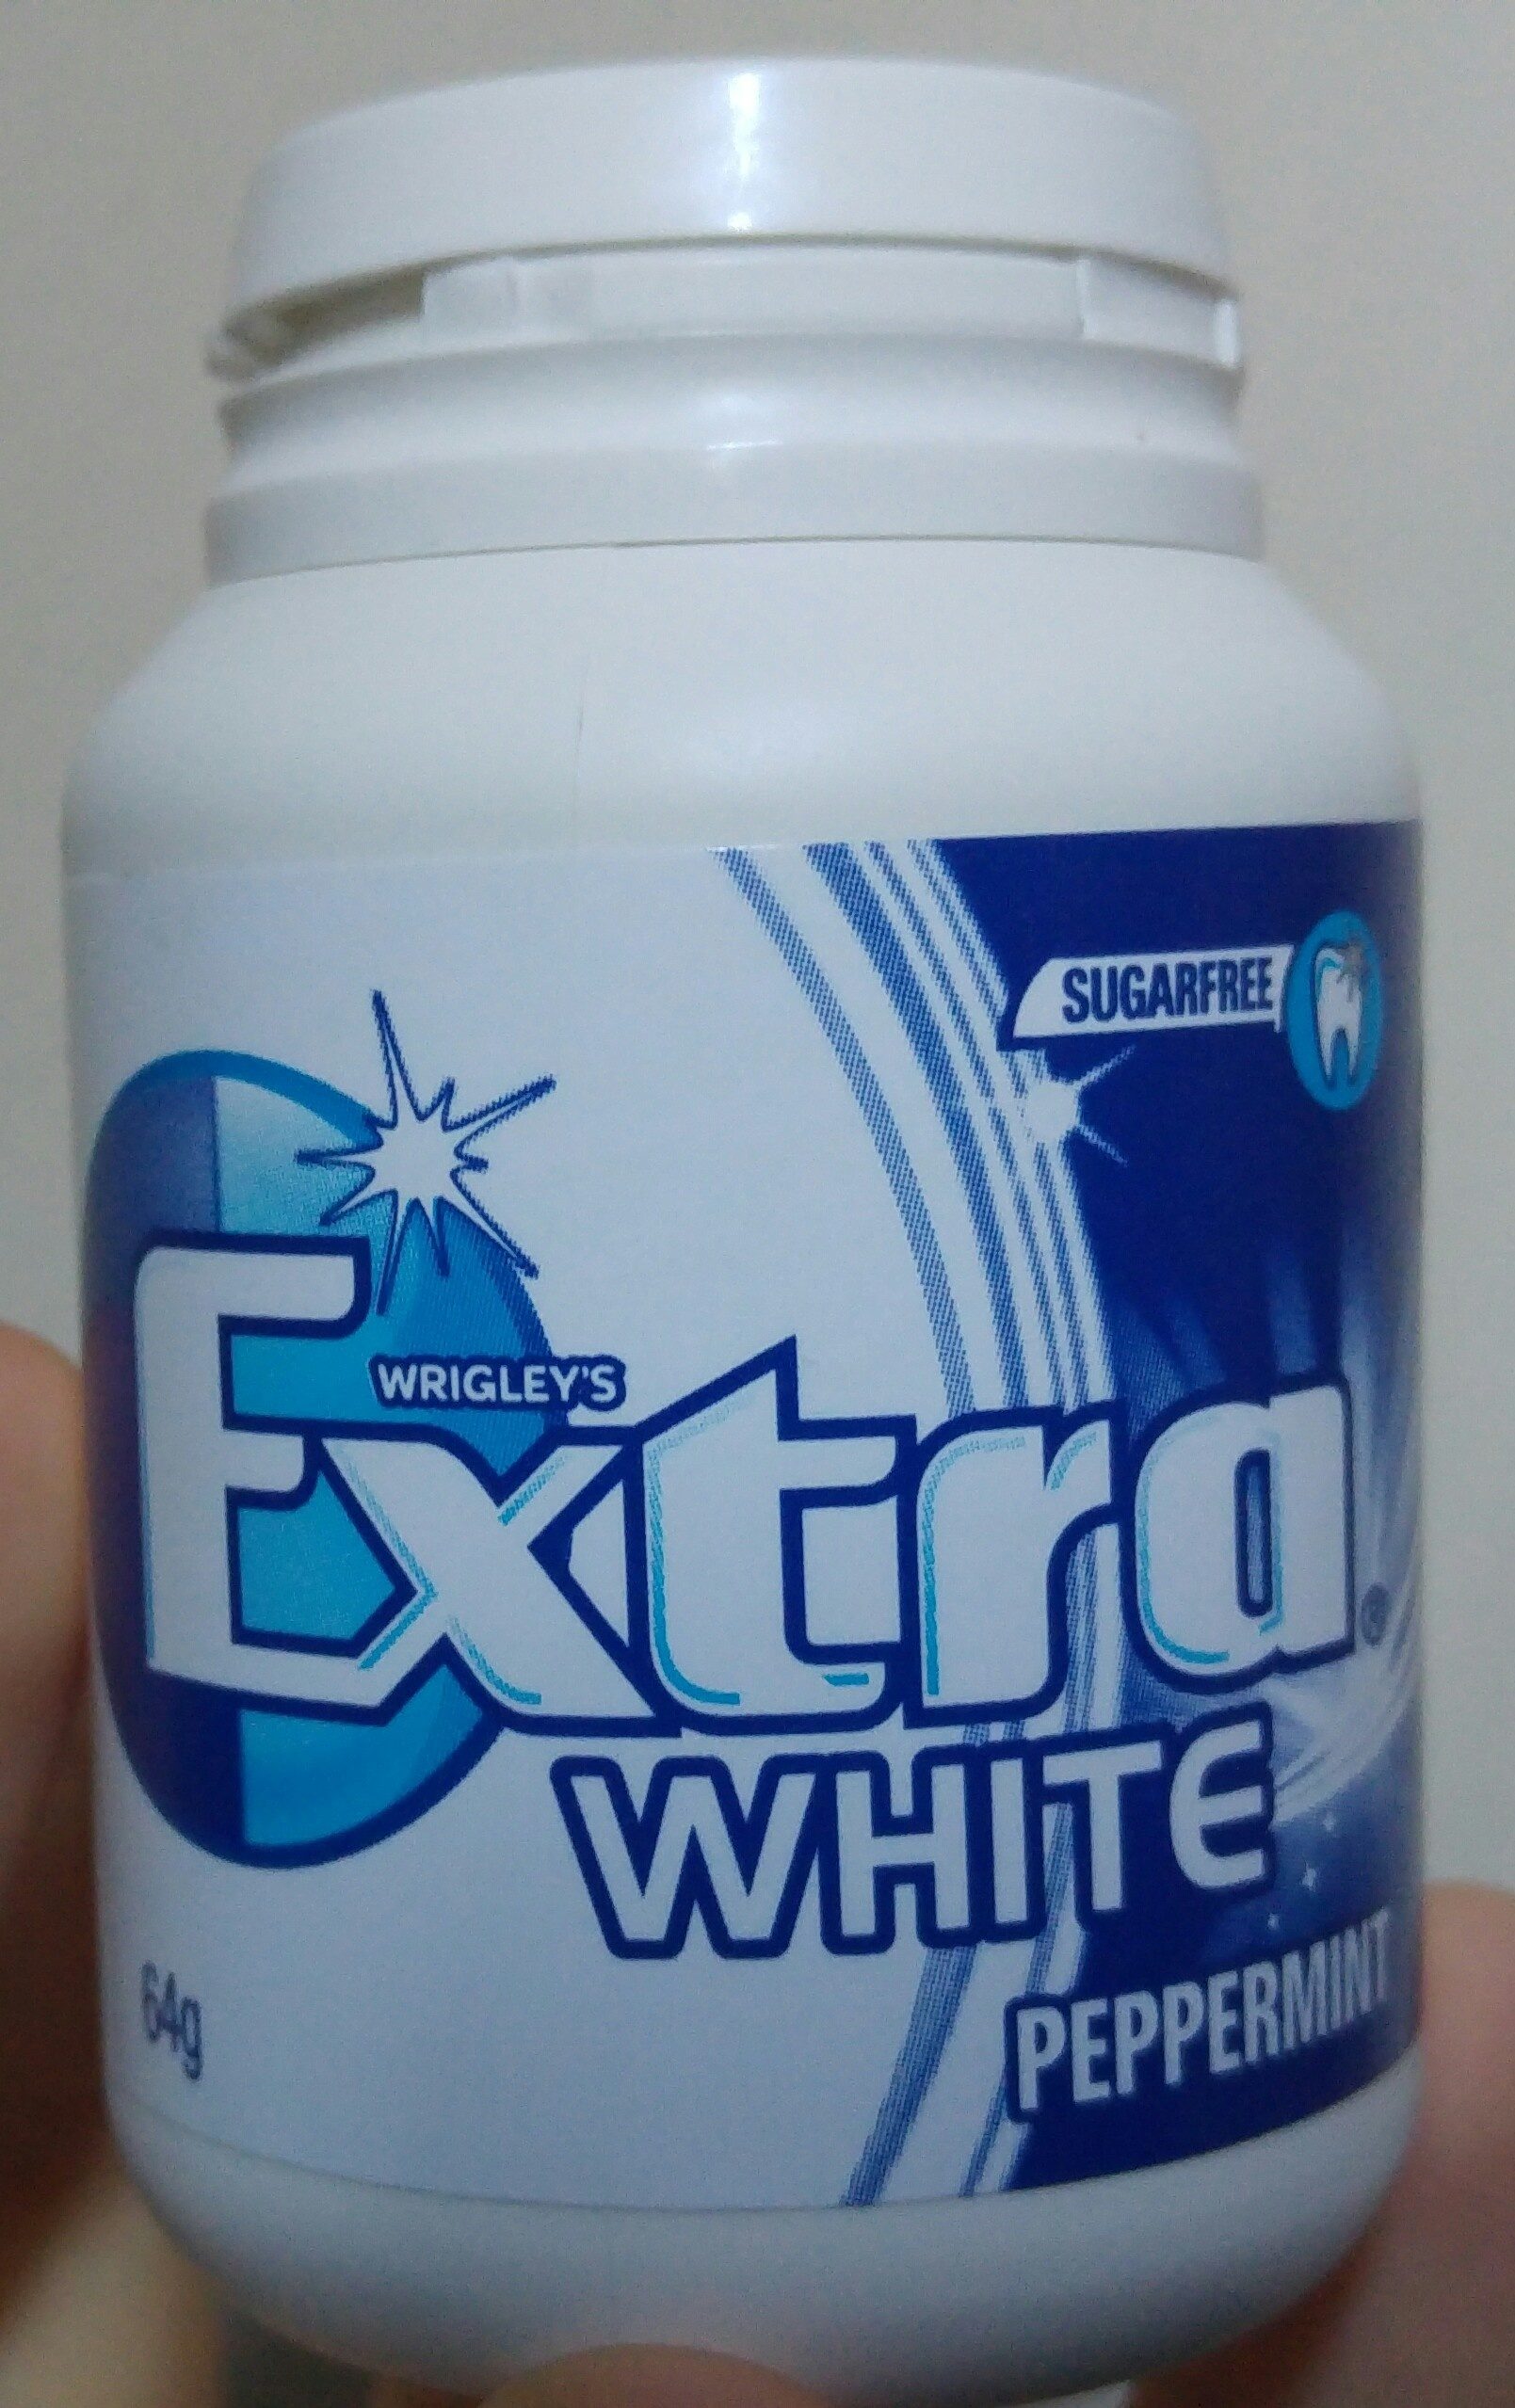 Extra White Sugar Free Chewing Gum In Bottle 64G - Product